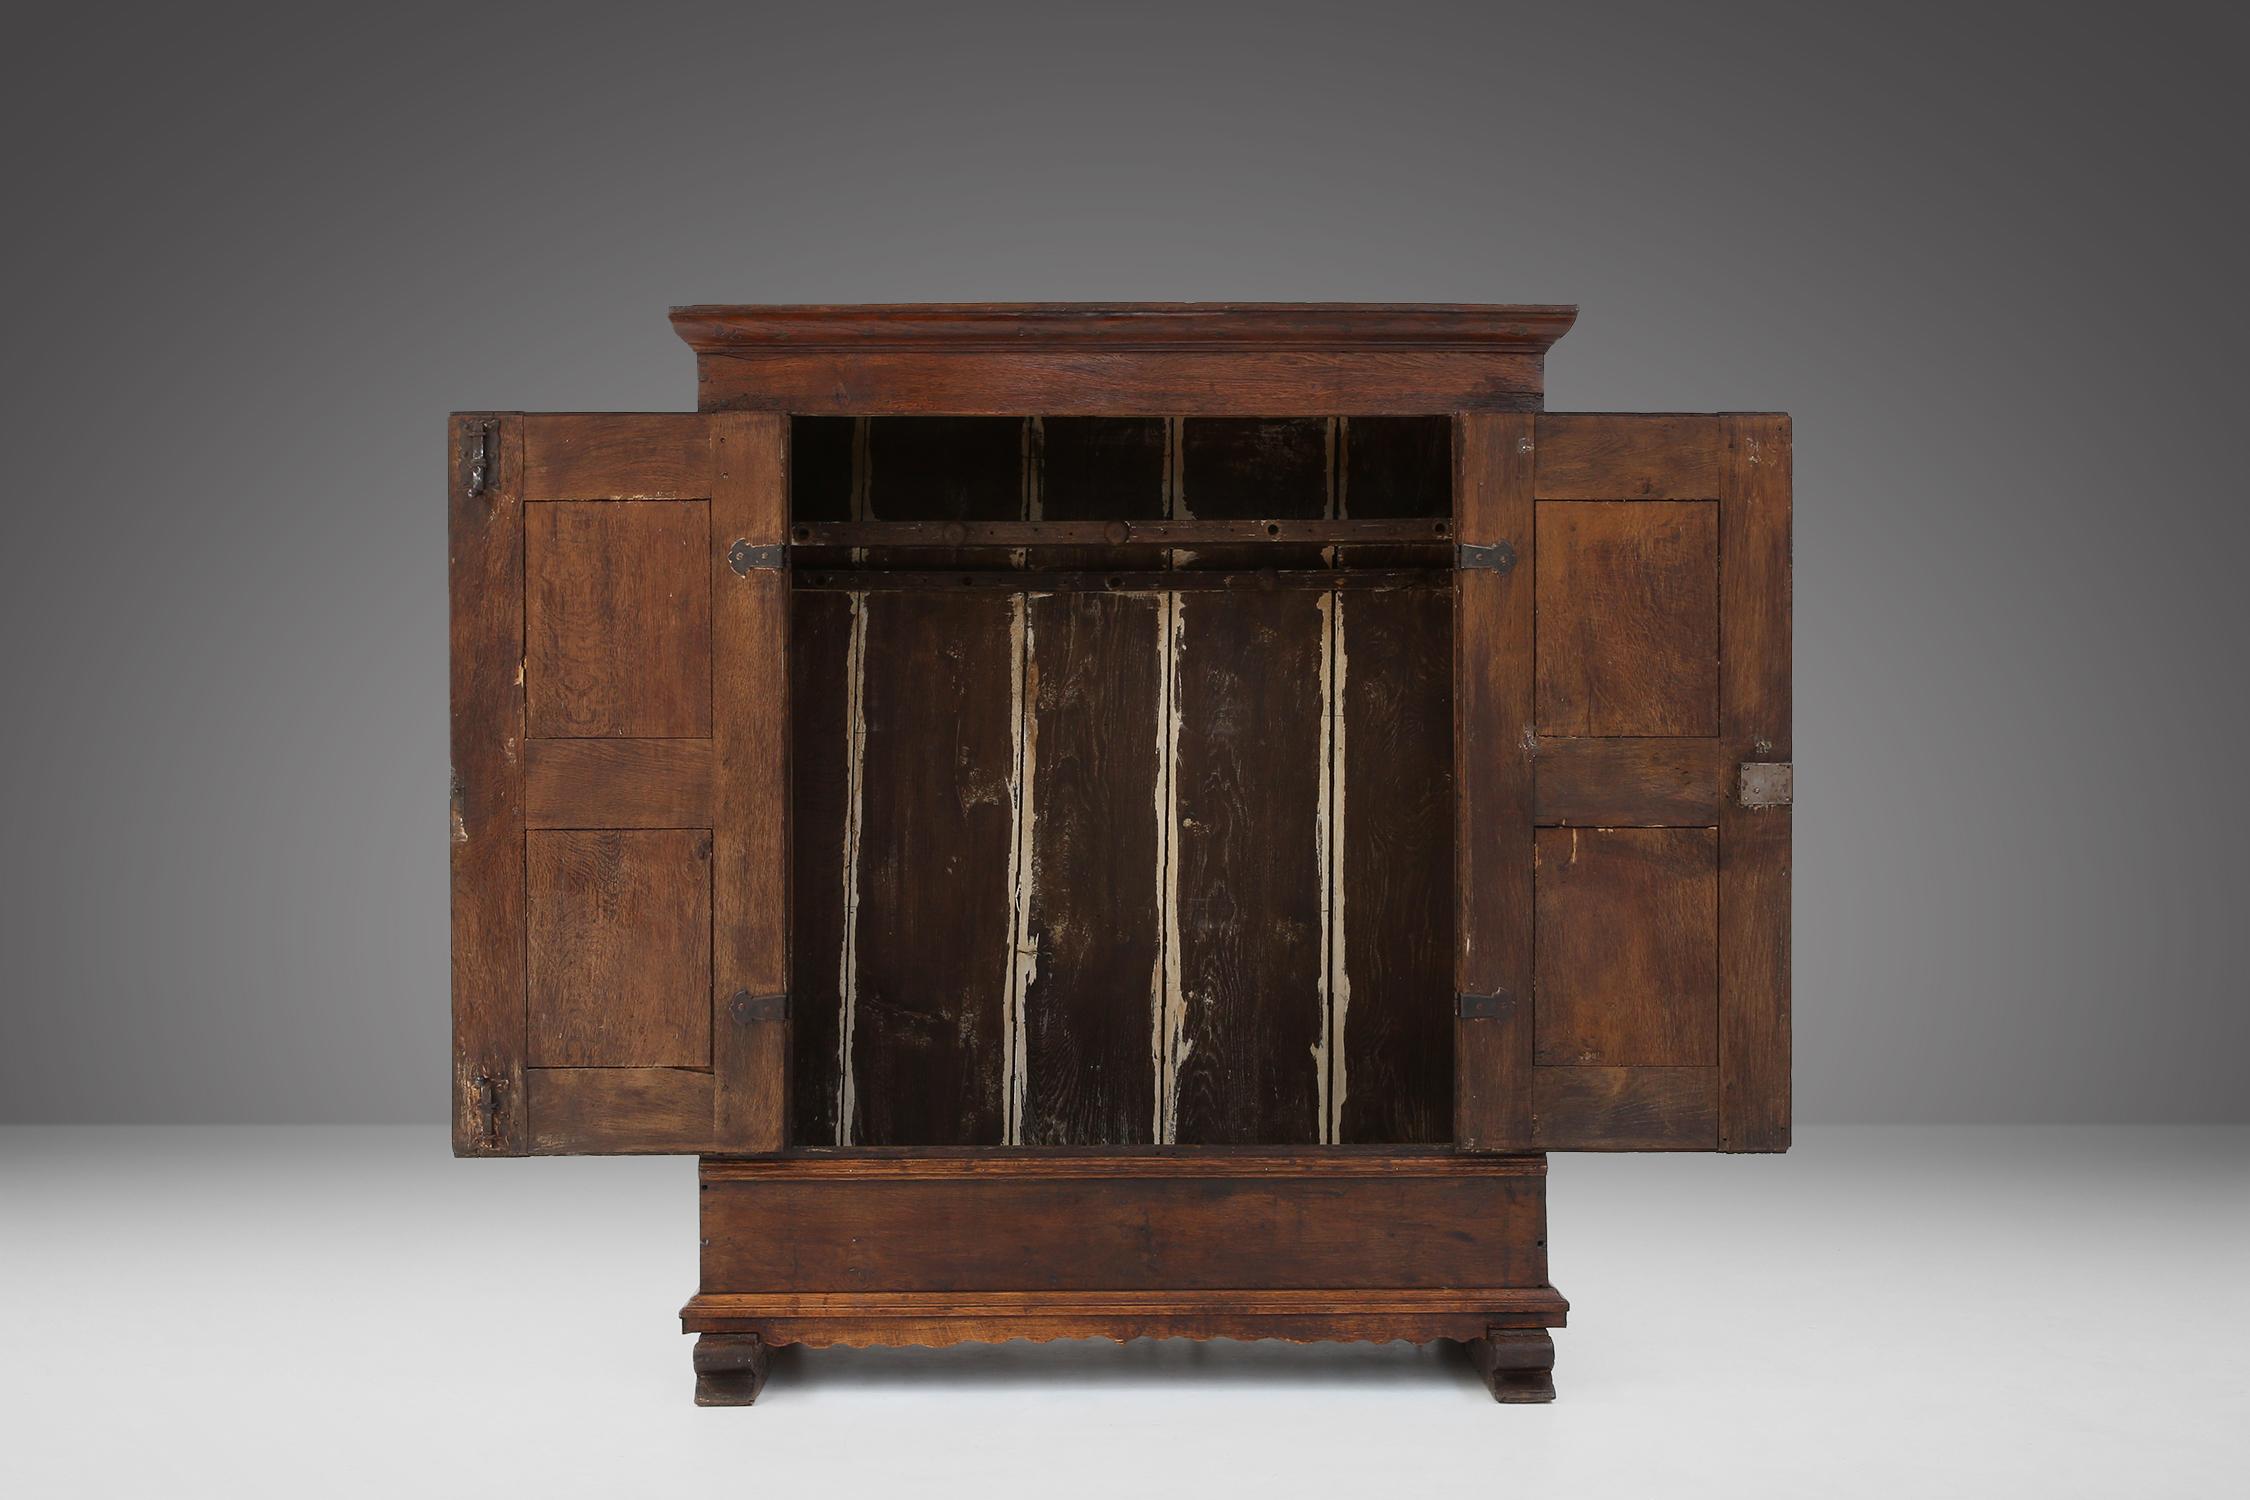 Belgian Flemish late 18th century cabinet For Sale